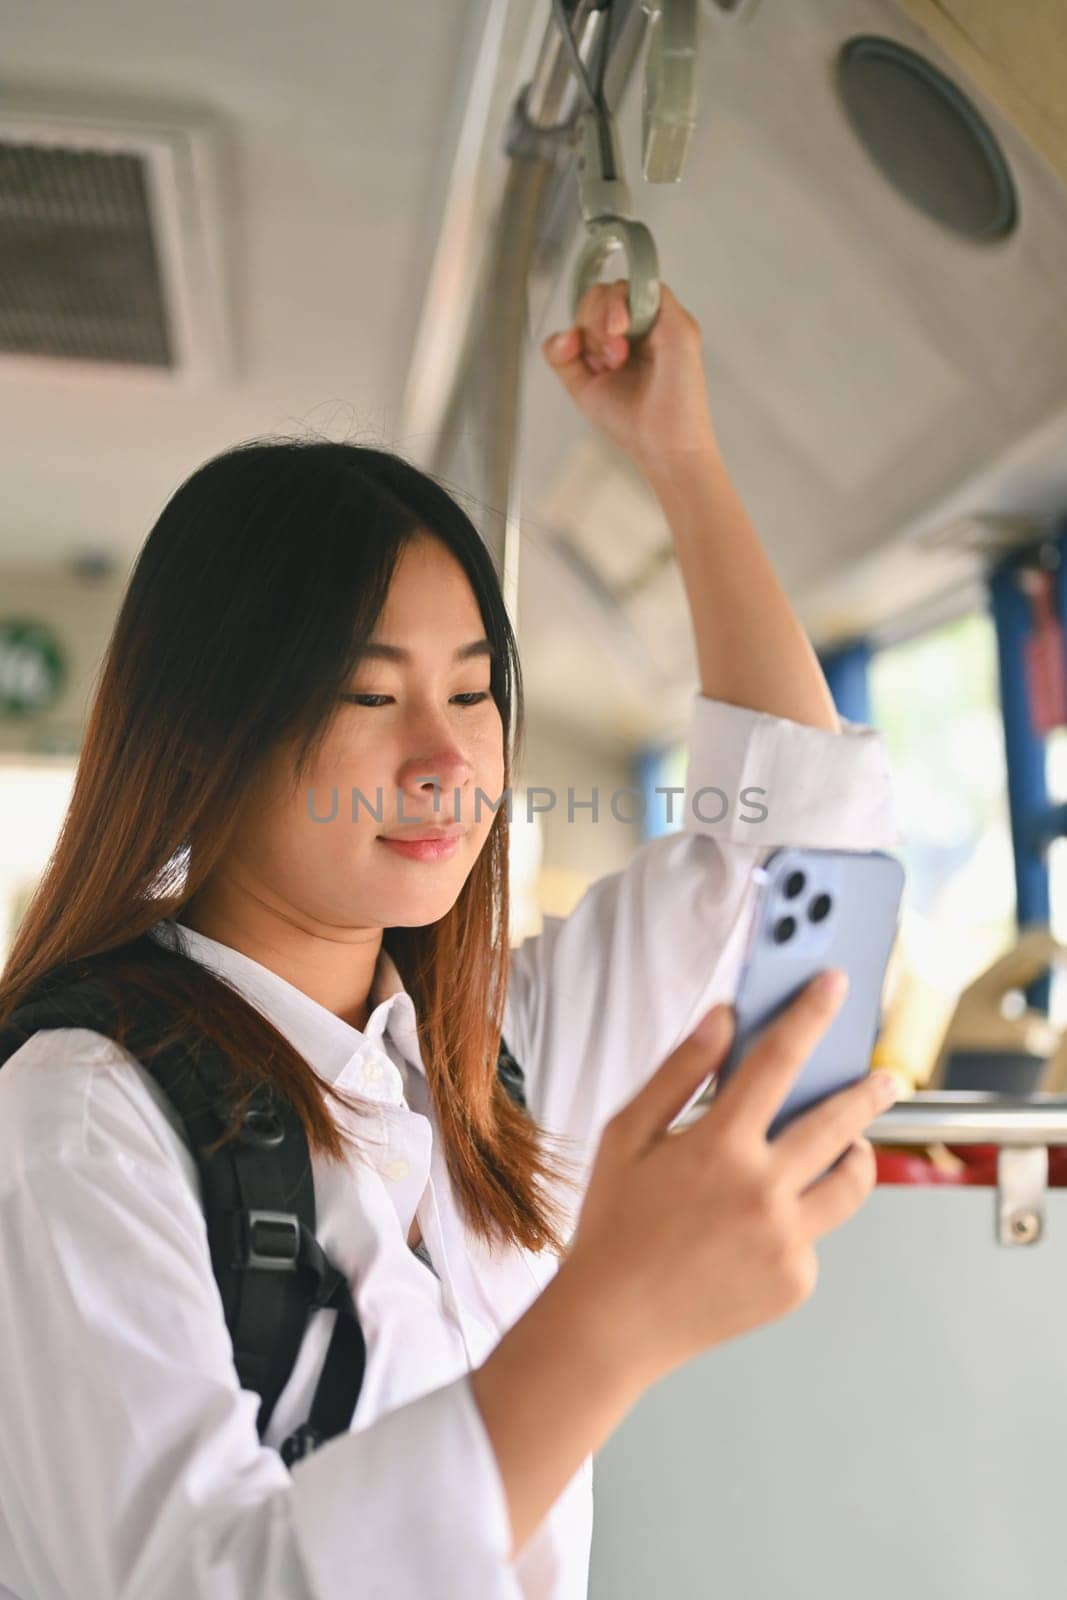 Portrait of young woman using a smartphone while standing on a bus. People and transportation concept.